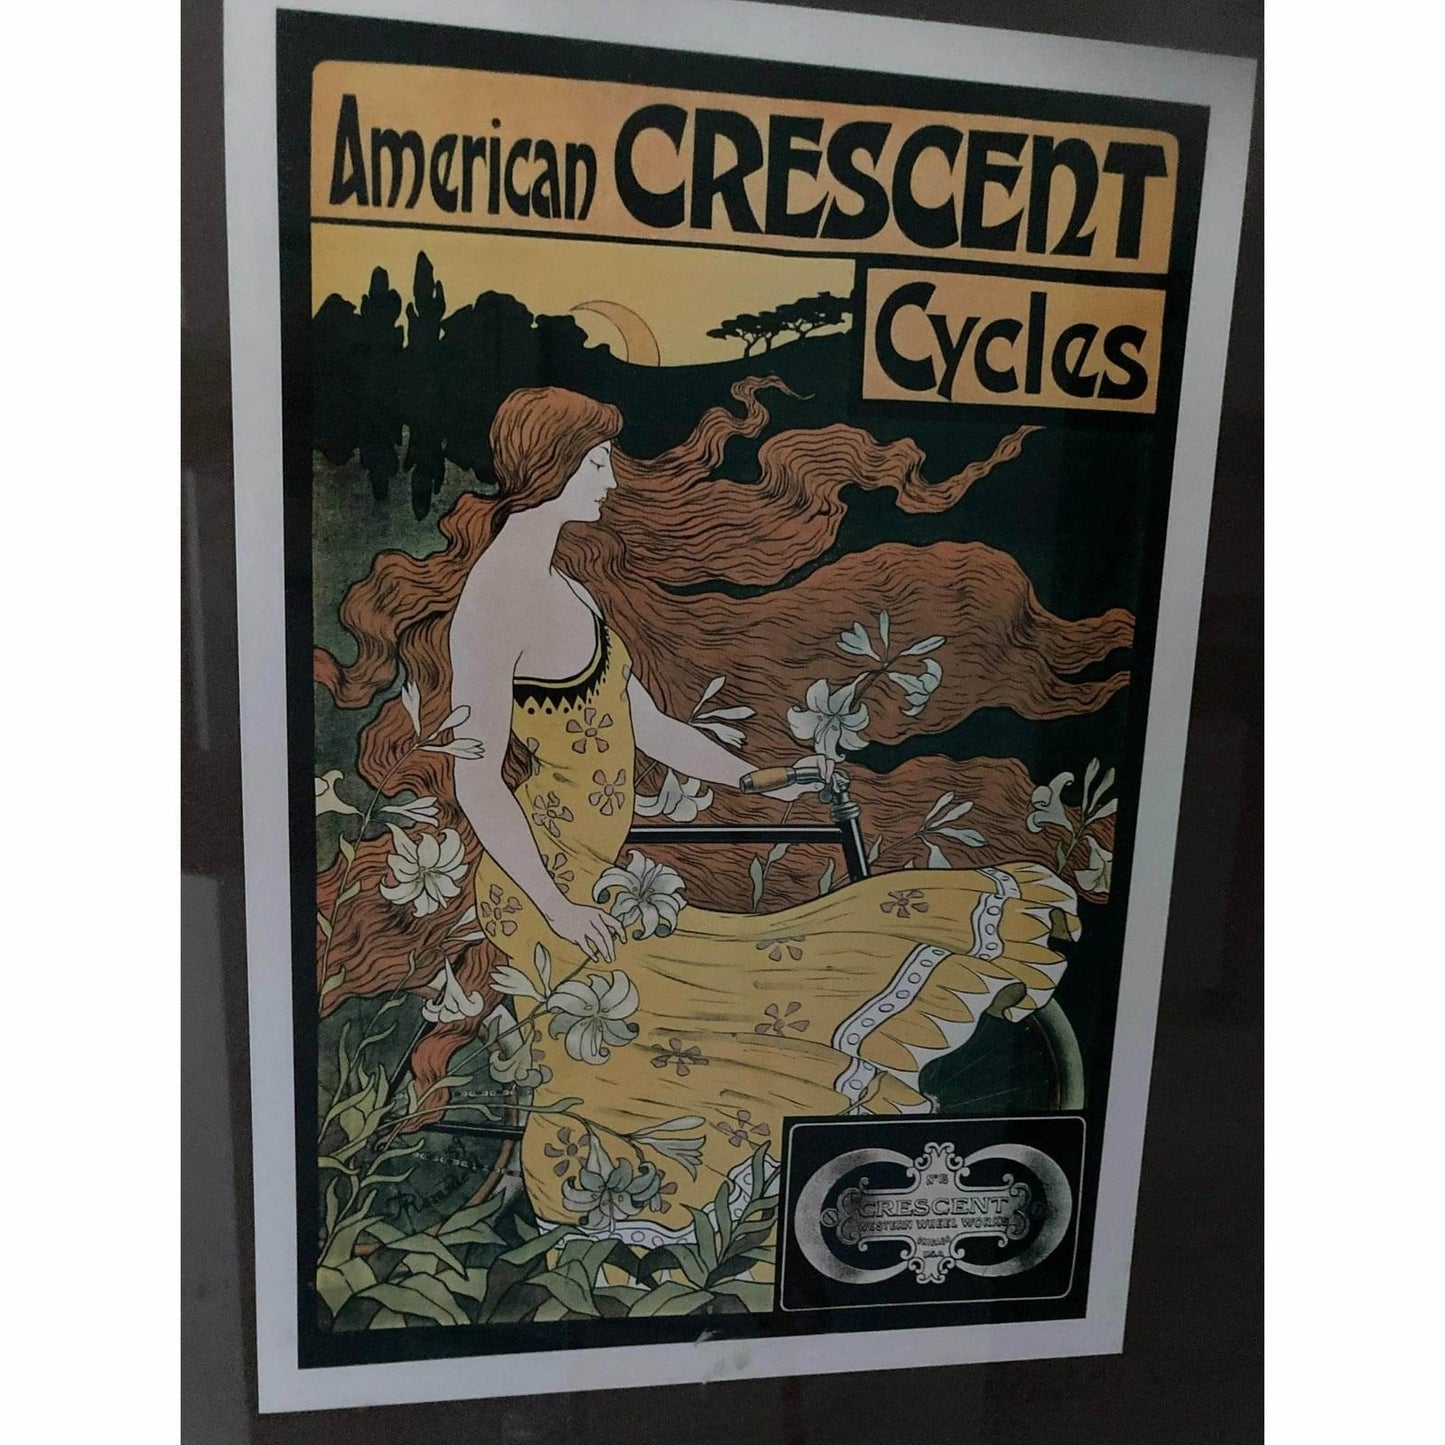 American Crescent Cycle [Poster Collectible] BooksCardsNBikes